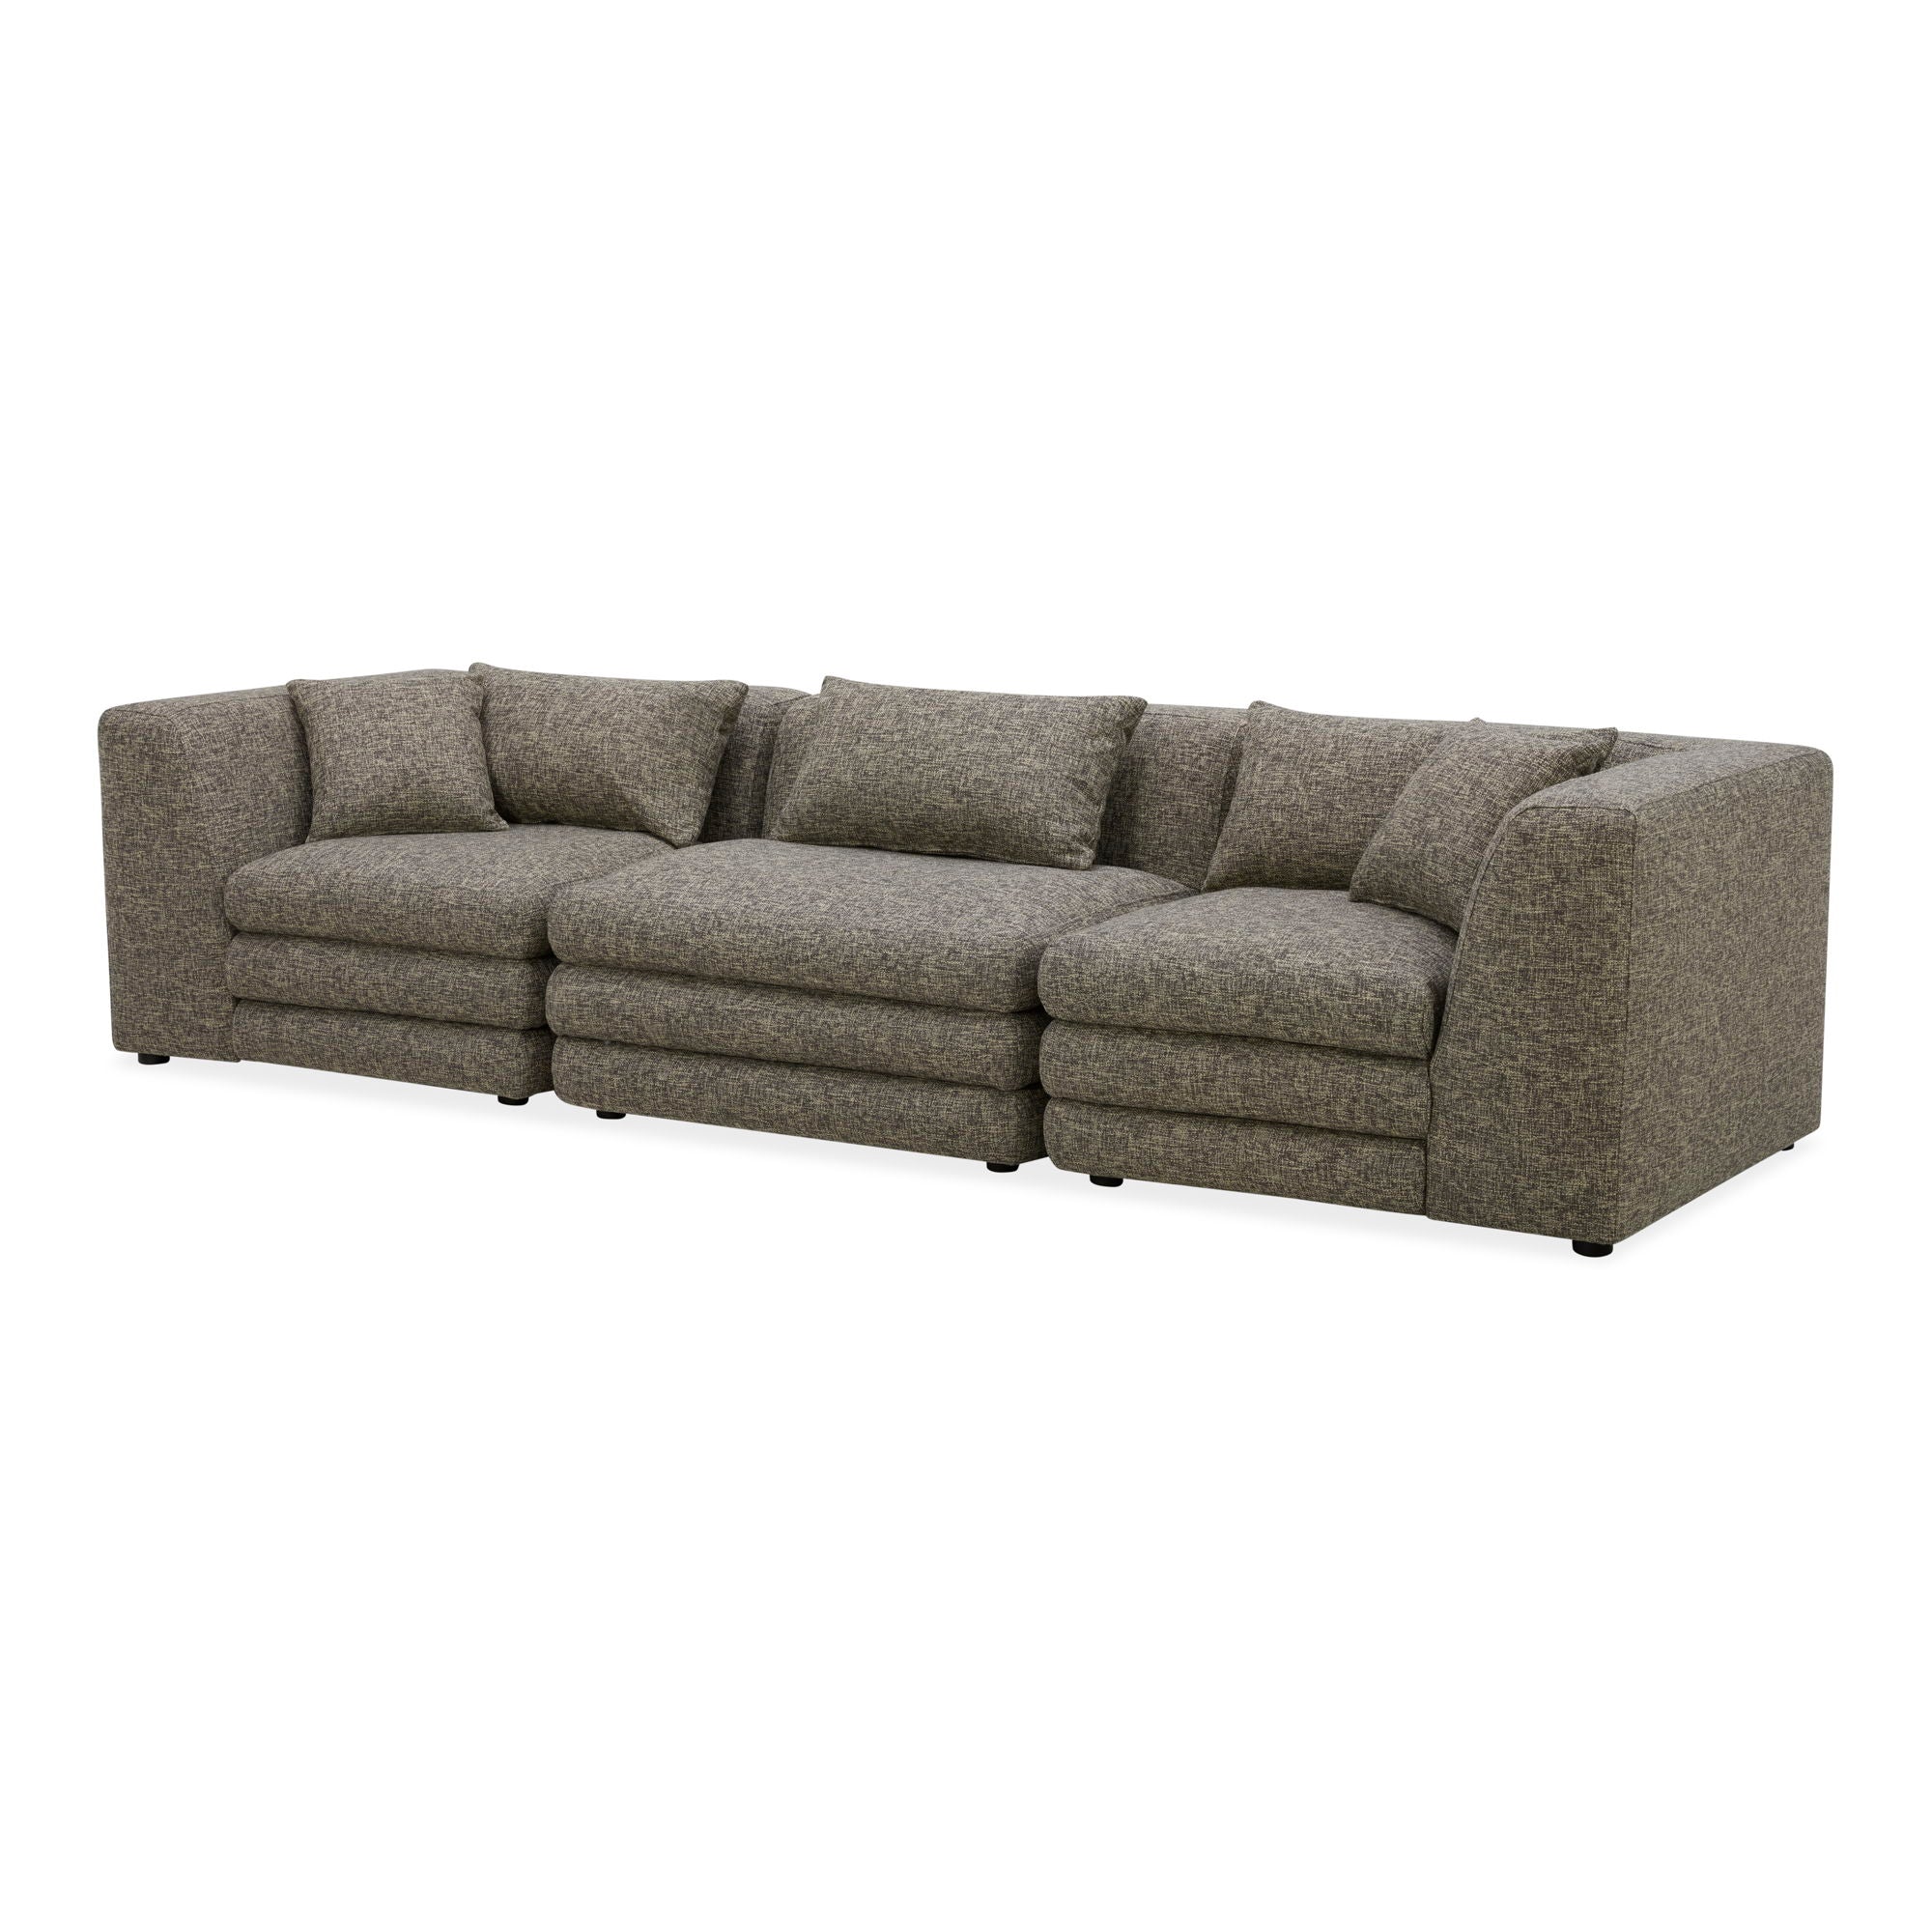 Lowtide - Modular Sofa - Surie Shadow-Stationary Sectionals-American Furniture Outlet